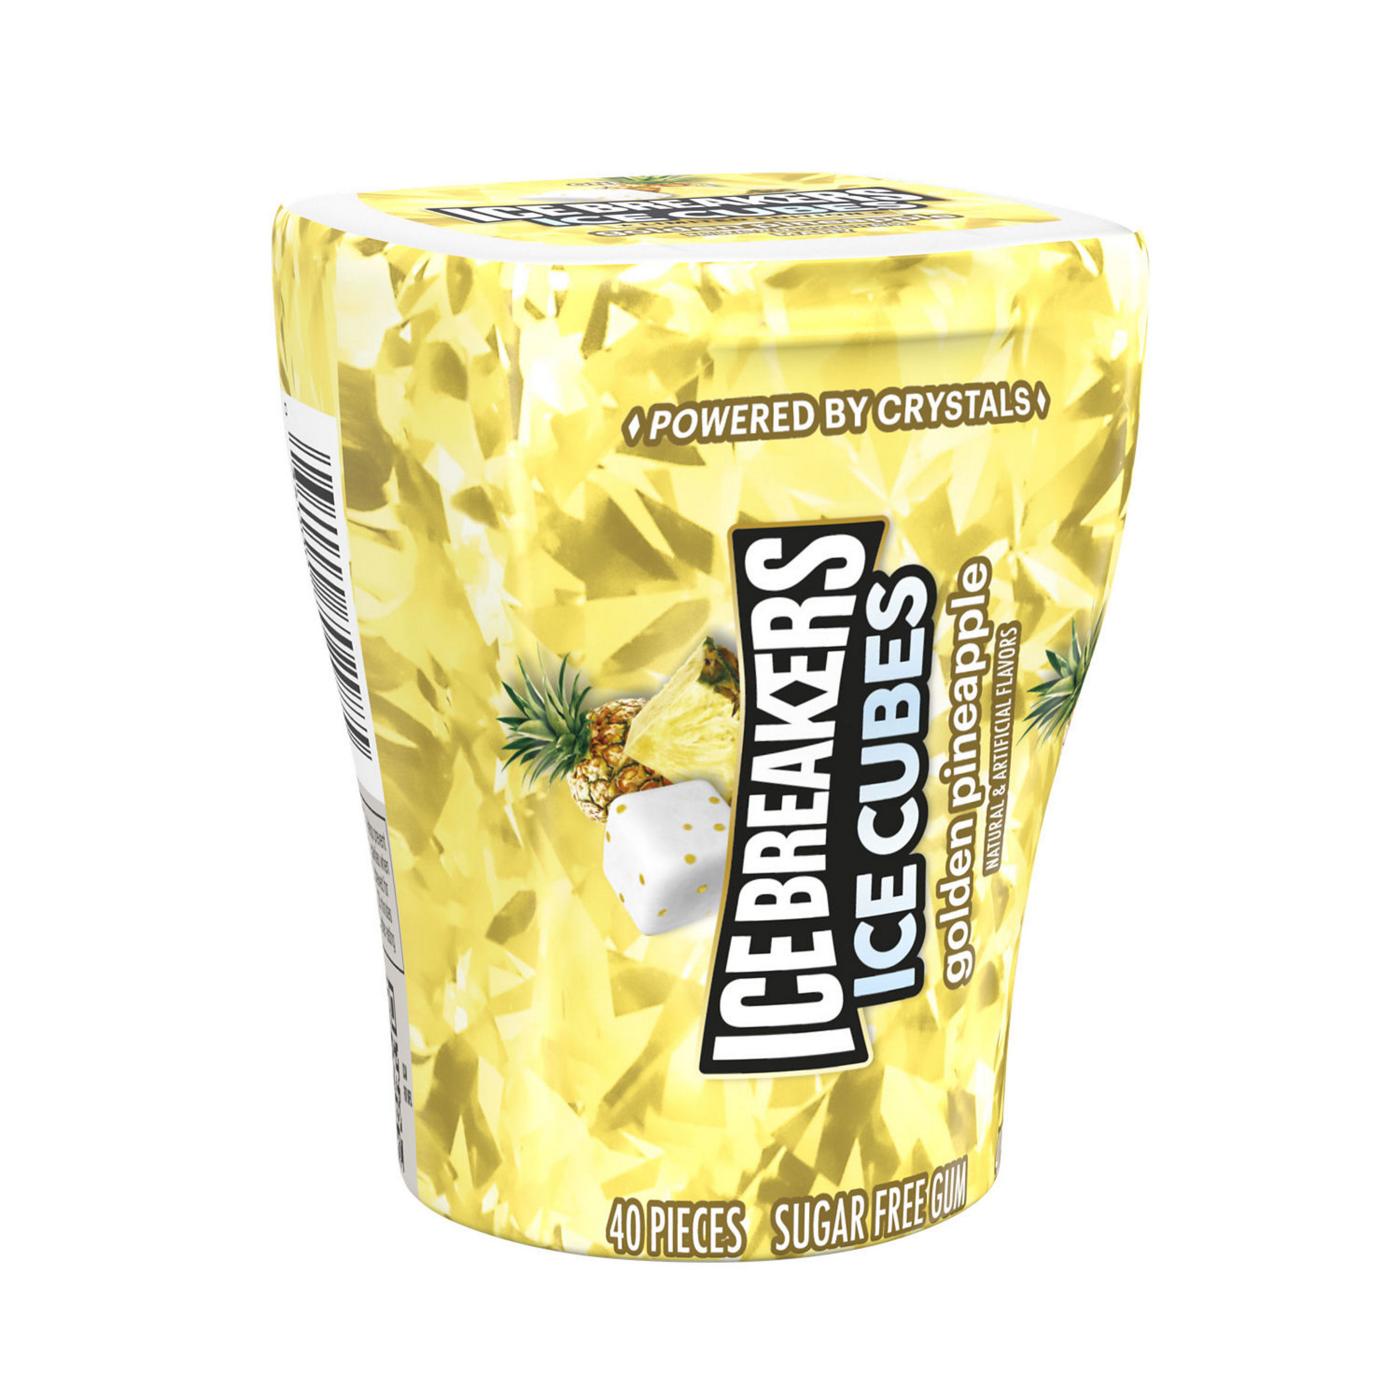 Ice Breakers Ice Cubes Golden Pineapple Sugar Free Chewing Gum Bottle; image 5 of 6